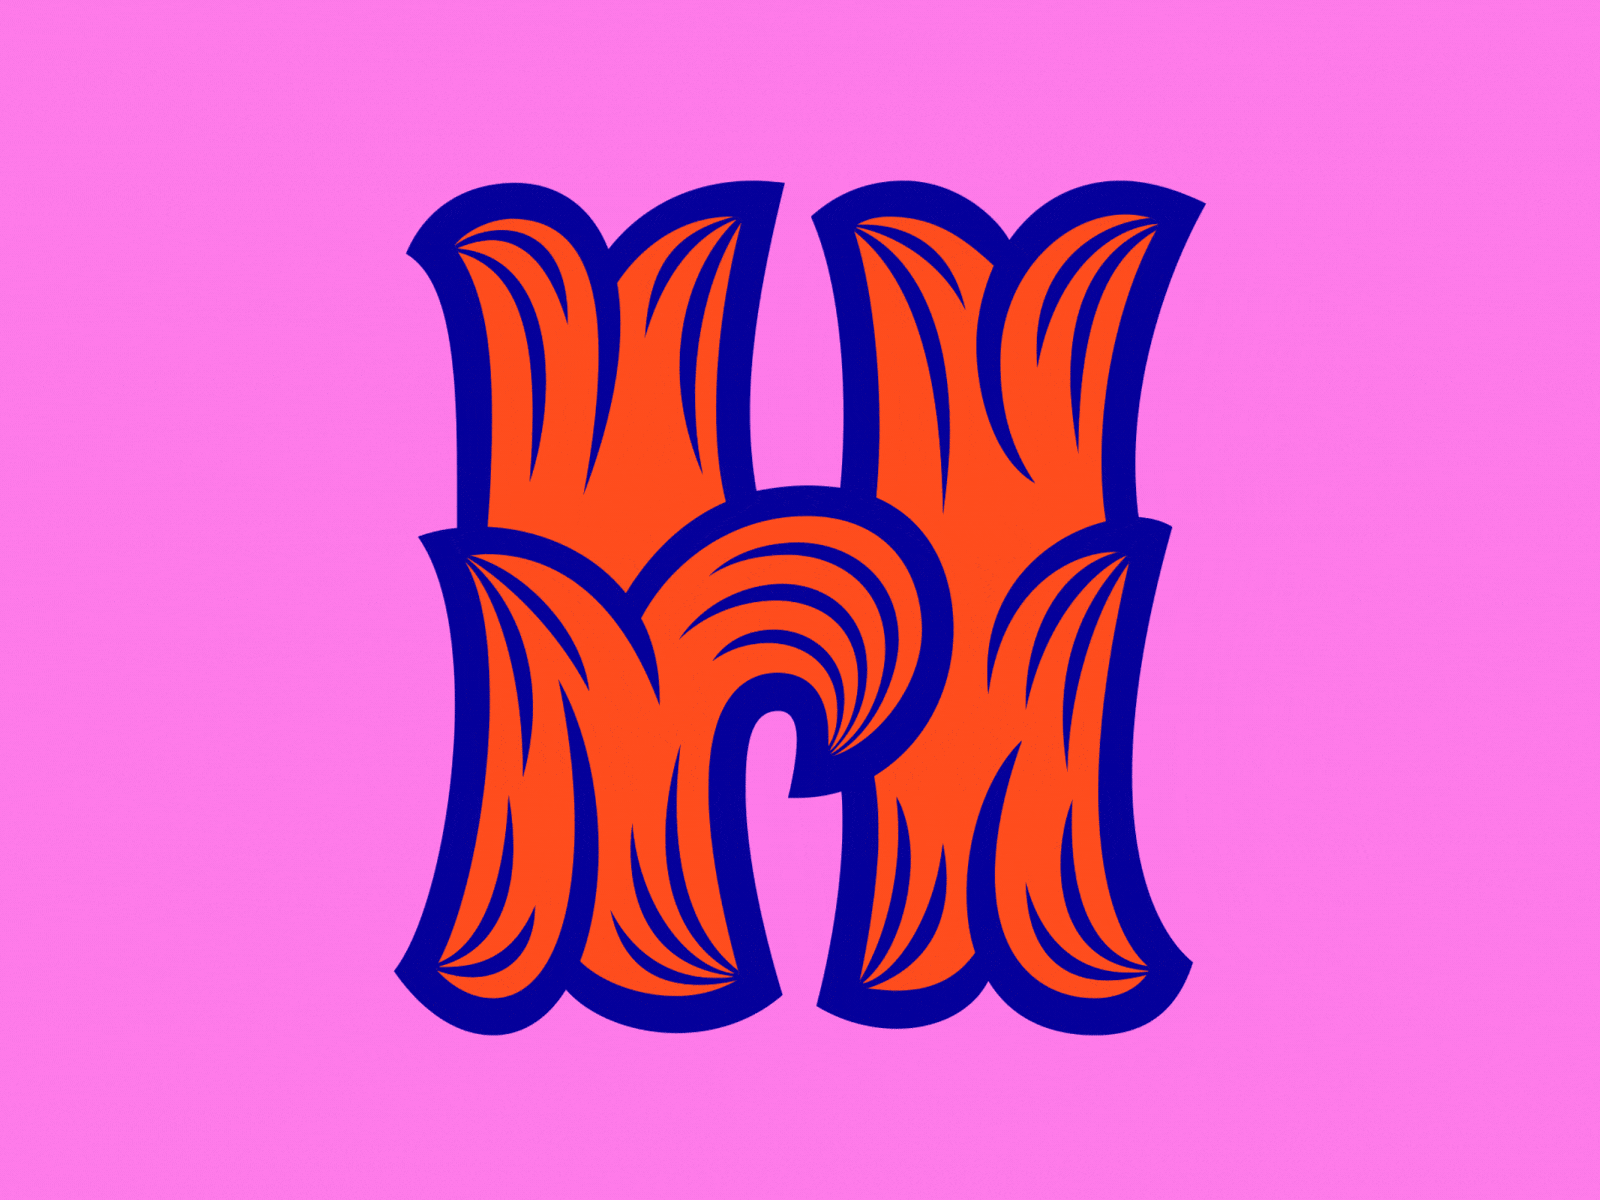 36 Days of Type - H 36 days of type 36daysoftype 36daysoftype08 36dot ae after effects animated type animation animography colors design kinetic kinetic type kinetic typography motion motion design motion graphic motion graphics type typography